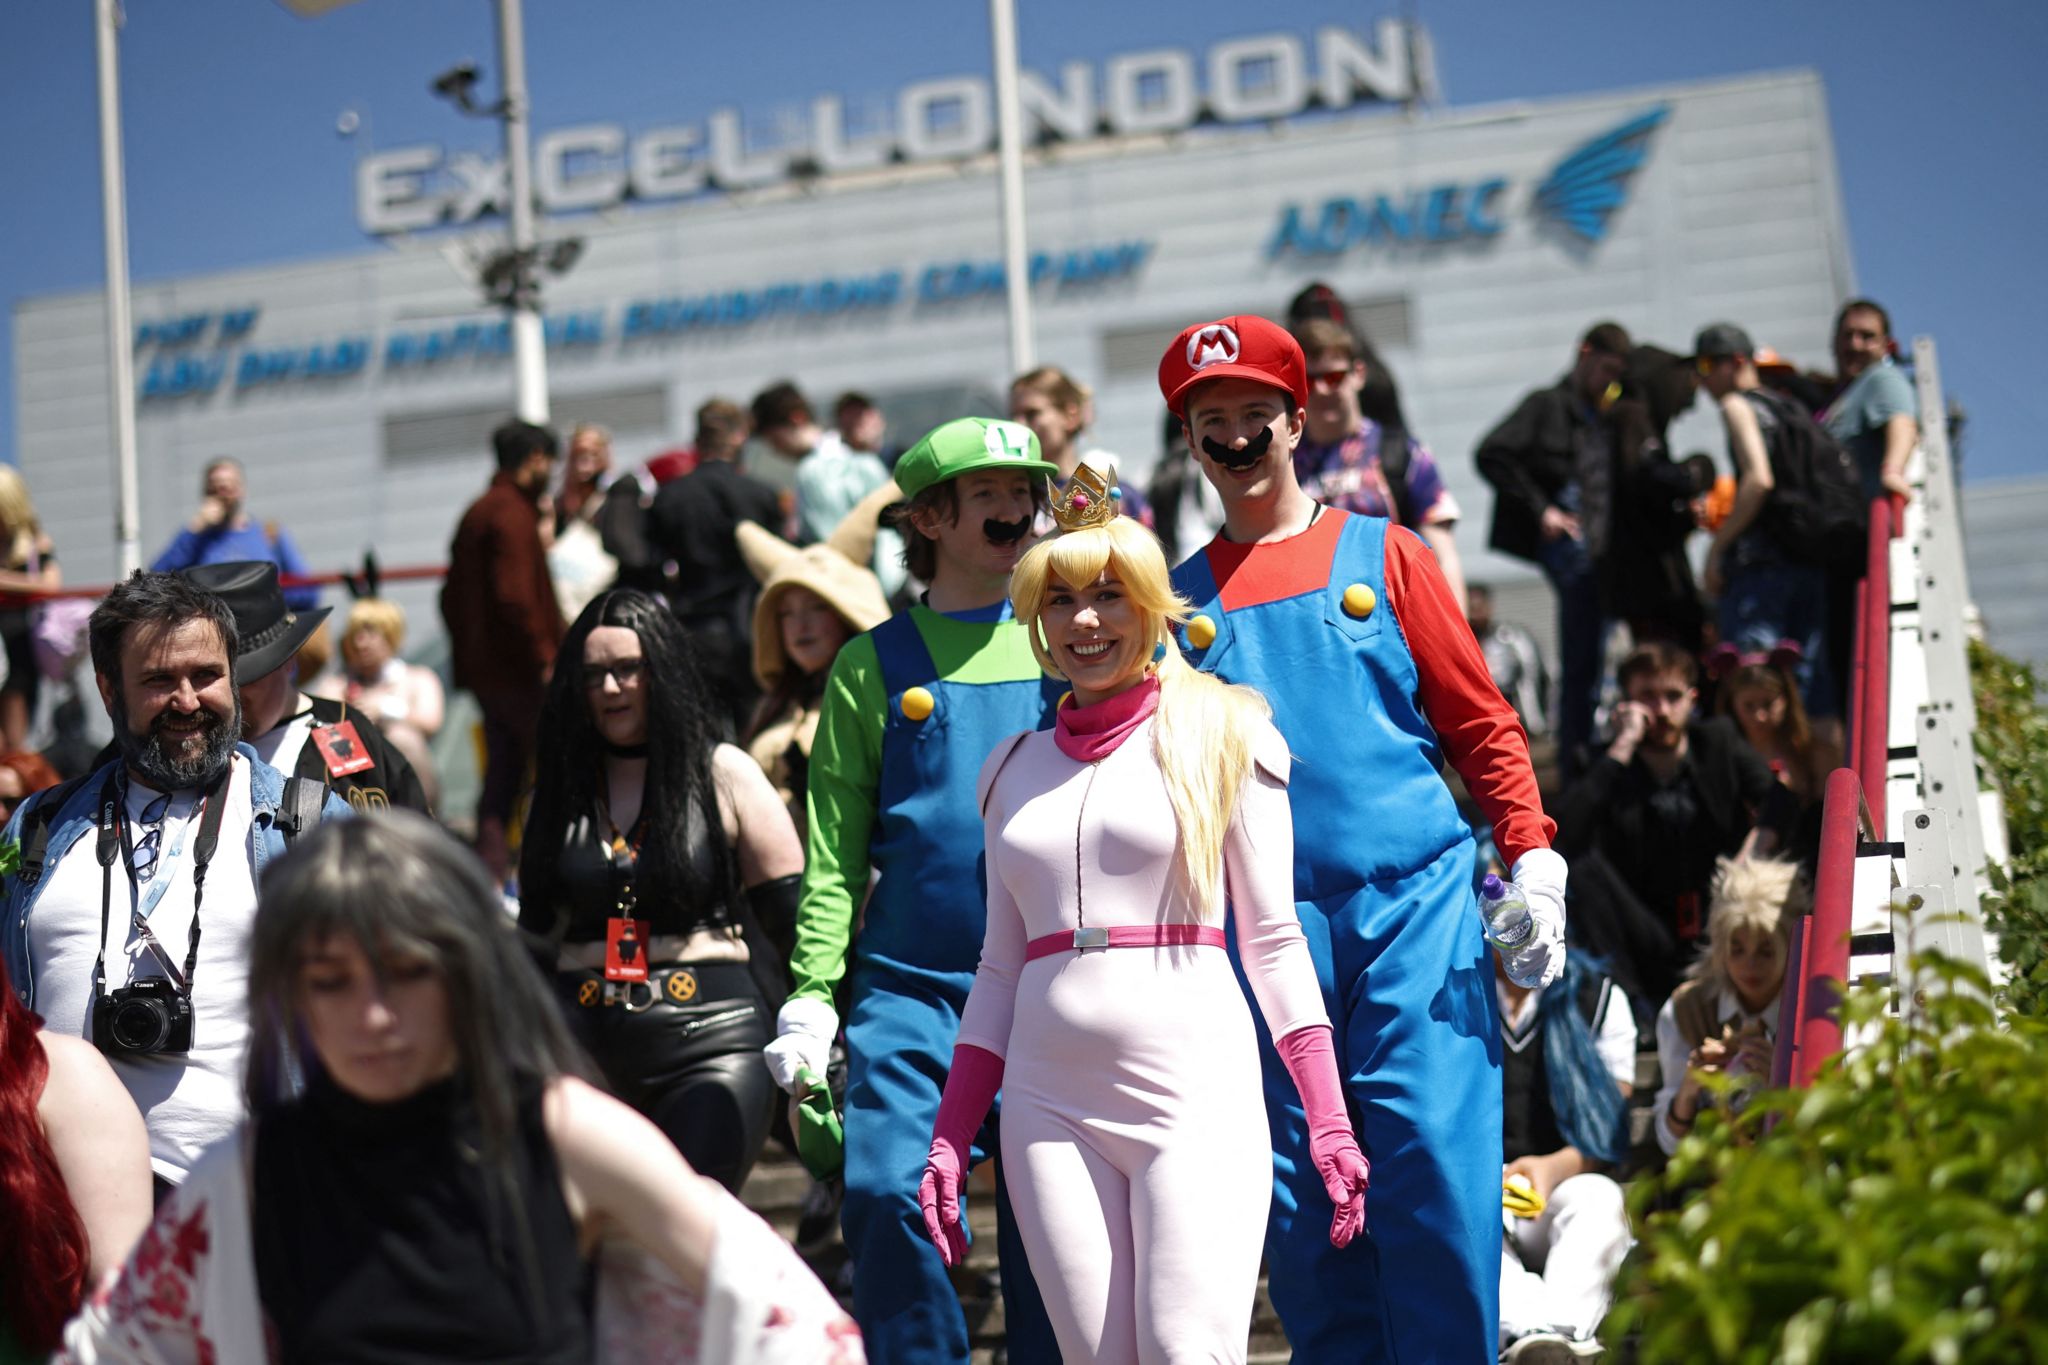 Outside of ExCel in London where Comic Con is held. The picture features people attending the convention, dressed up as various characters. The main people in the photo are seen dressed as characters from Super Mario Bros. A woman is dressed as Princess Peach, wearing a blonde wig, a gold crown and a light pink jumpsuit with dark pink gloves. Two men behind are dressed as Mario (right) and Luigi (left). Both men are wearing blue overalls and dark brown moustaches. Luigi is wearing a breen shirt underneath his overalls and a green hat with the letter "L" on it. Mario is wearing a red shirt under his overalls and a red hat with the letter "M" on it. Other people in various costumes surround them.